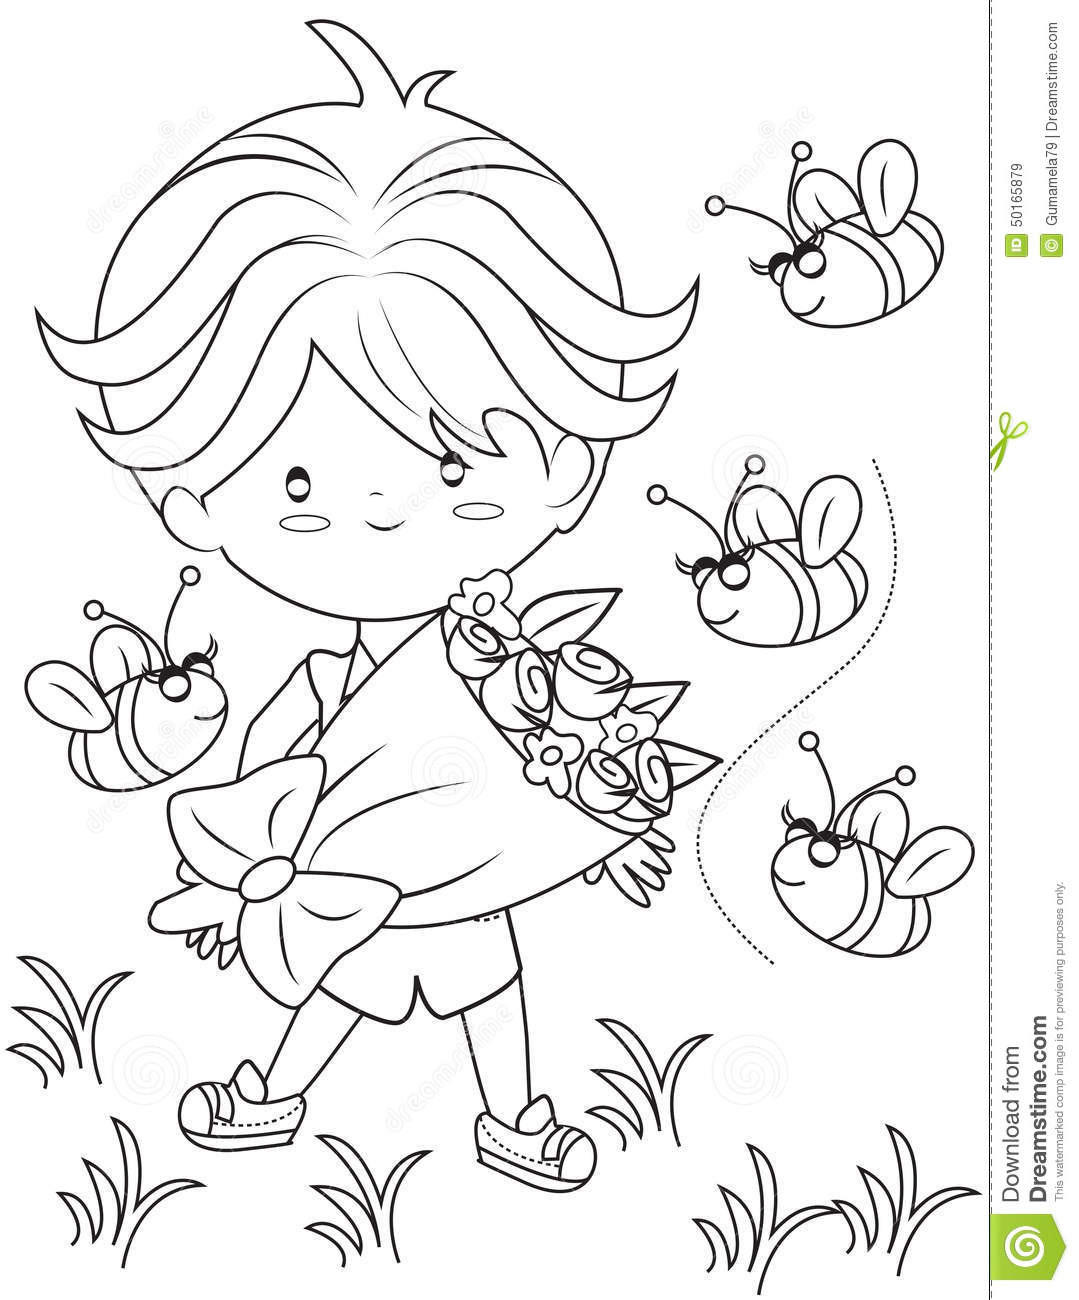 Flower Coloring Sheets For Boys
 Boy With A Bouquet Flowers Coloring Page Stock